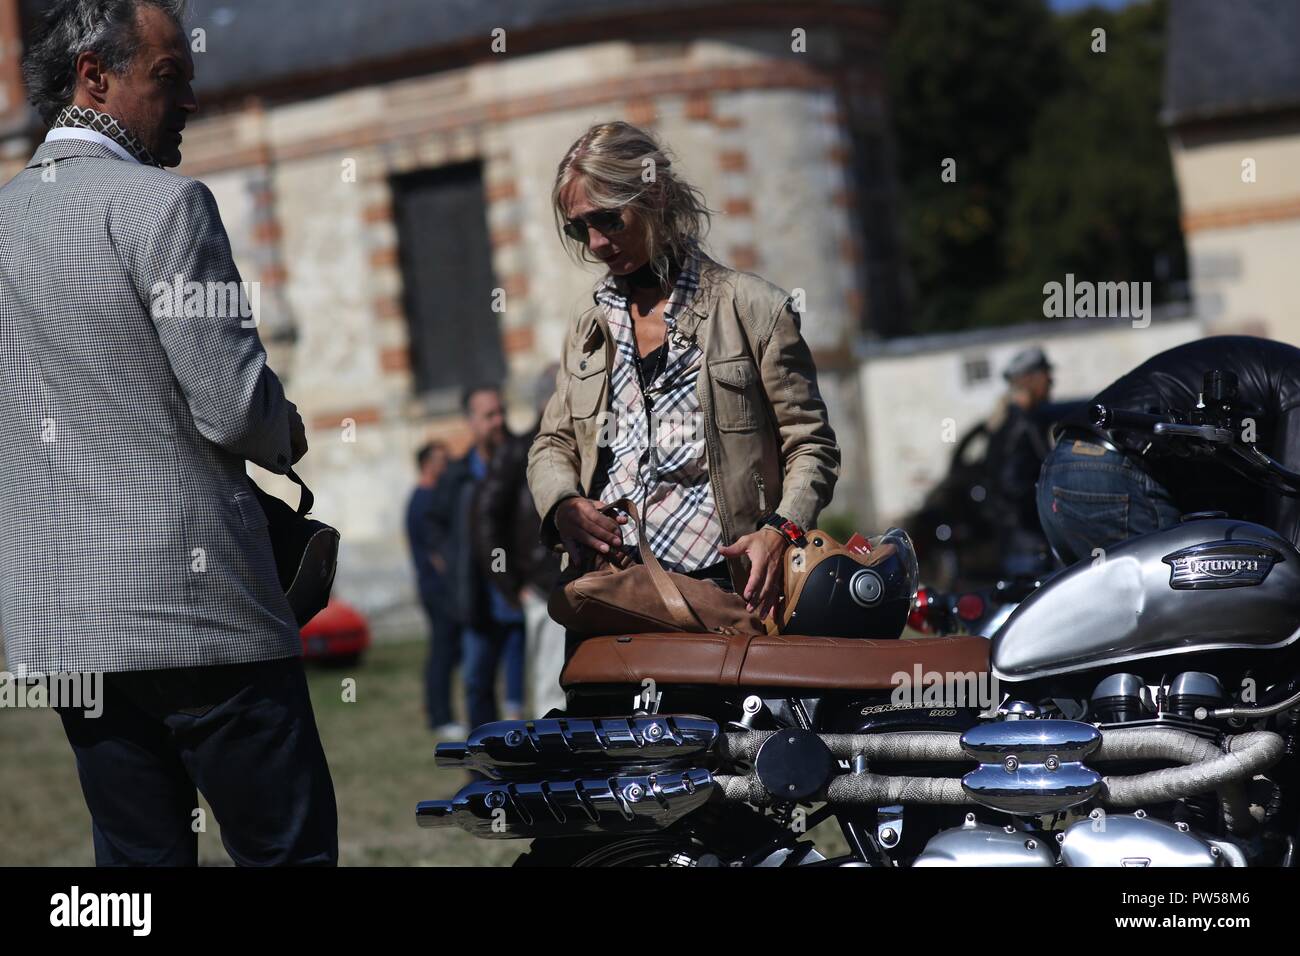 Two up on a Triumph Scrambler at Château de Neuville in Gambais (78) – France. Stock Photo